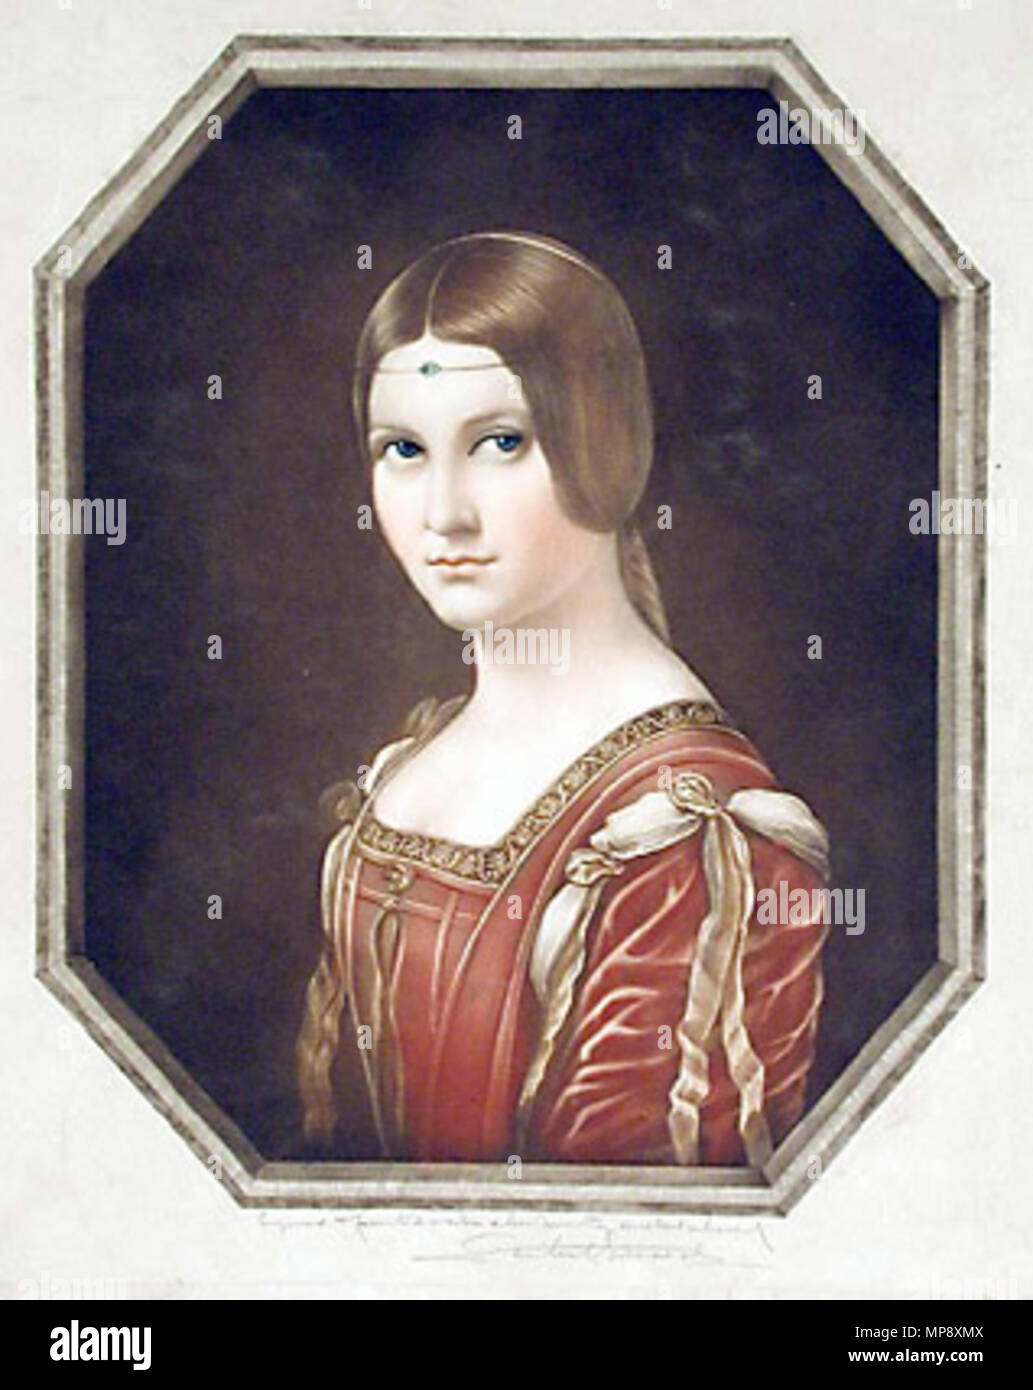 .  Leonardo Da Vinci (1452-1519) (after) S. Arlent Edwards (engraver) La Belle Ferroniere Color Printed Mezzotint, Finished by Hand Signed and Inscribed by Engraver in Pencil Lower Margin London: c. 1900 20 x 16 1/2 inches, overall 14 3/4 x 12 1/4 inches, image . circa 1900. Signed and Inscribed by Engraver in Pencil Lower Margin 782 La Belle Ferroniere mezzotint Stock Photo